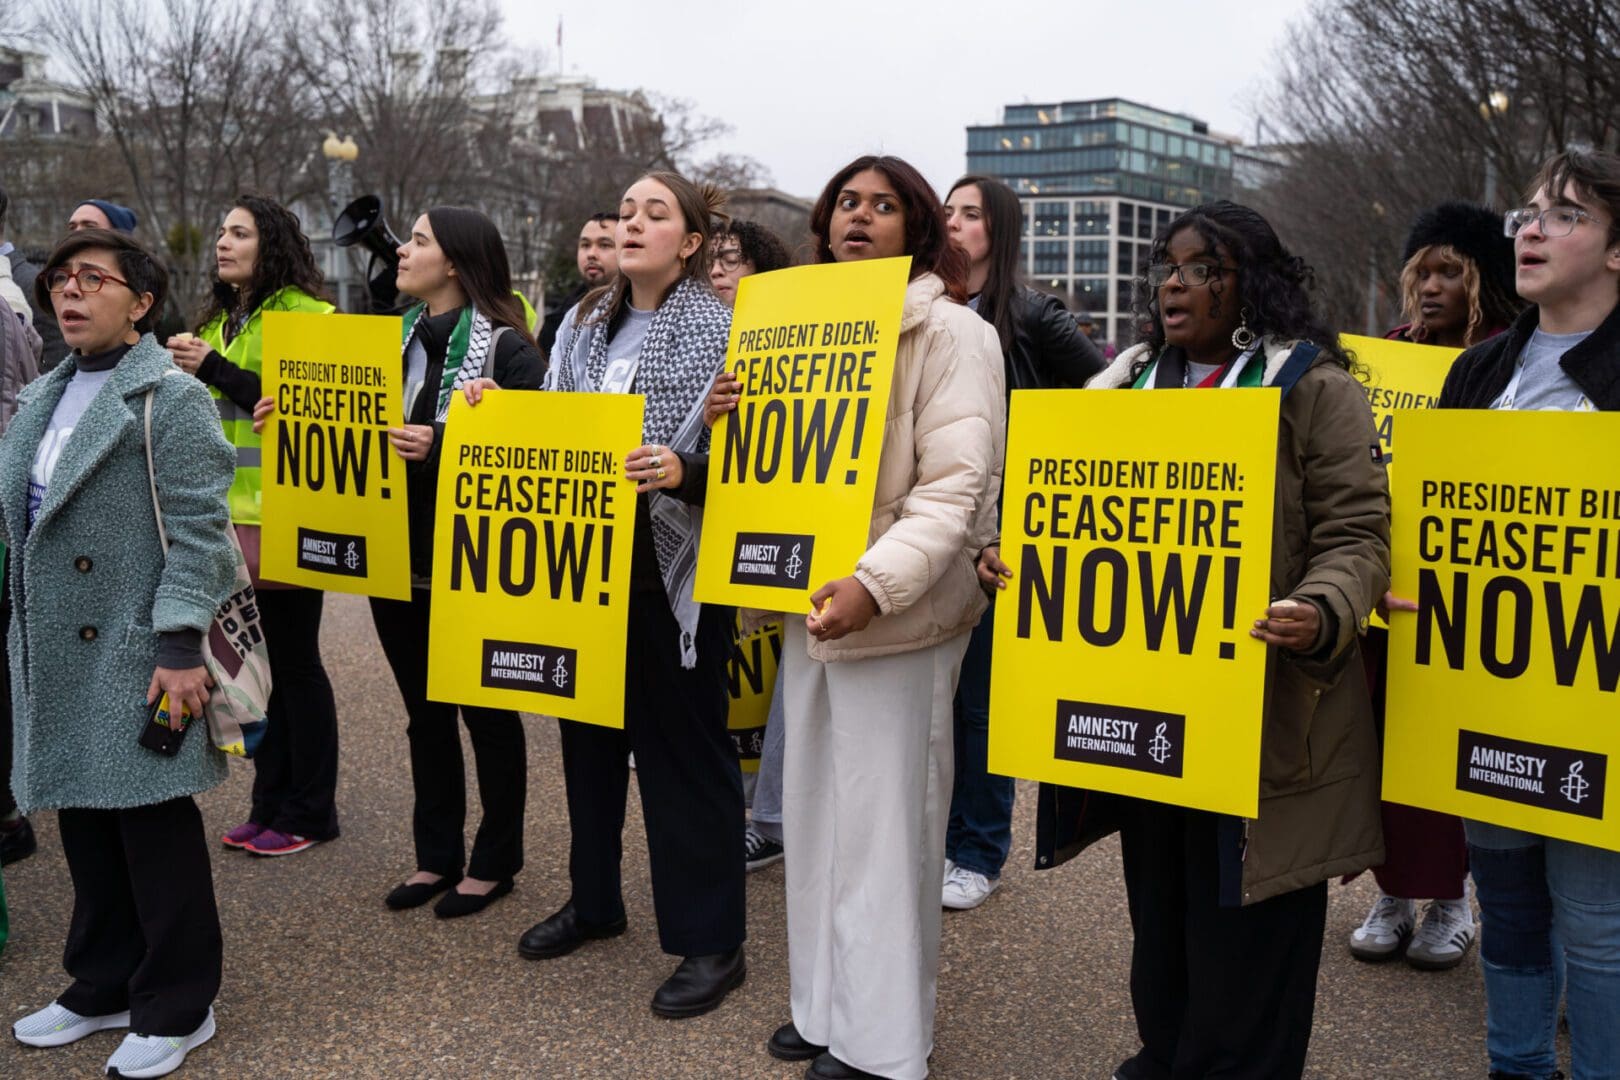 Amnesty International USA protesters hold Ceasefire Now signs